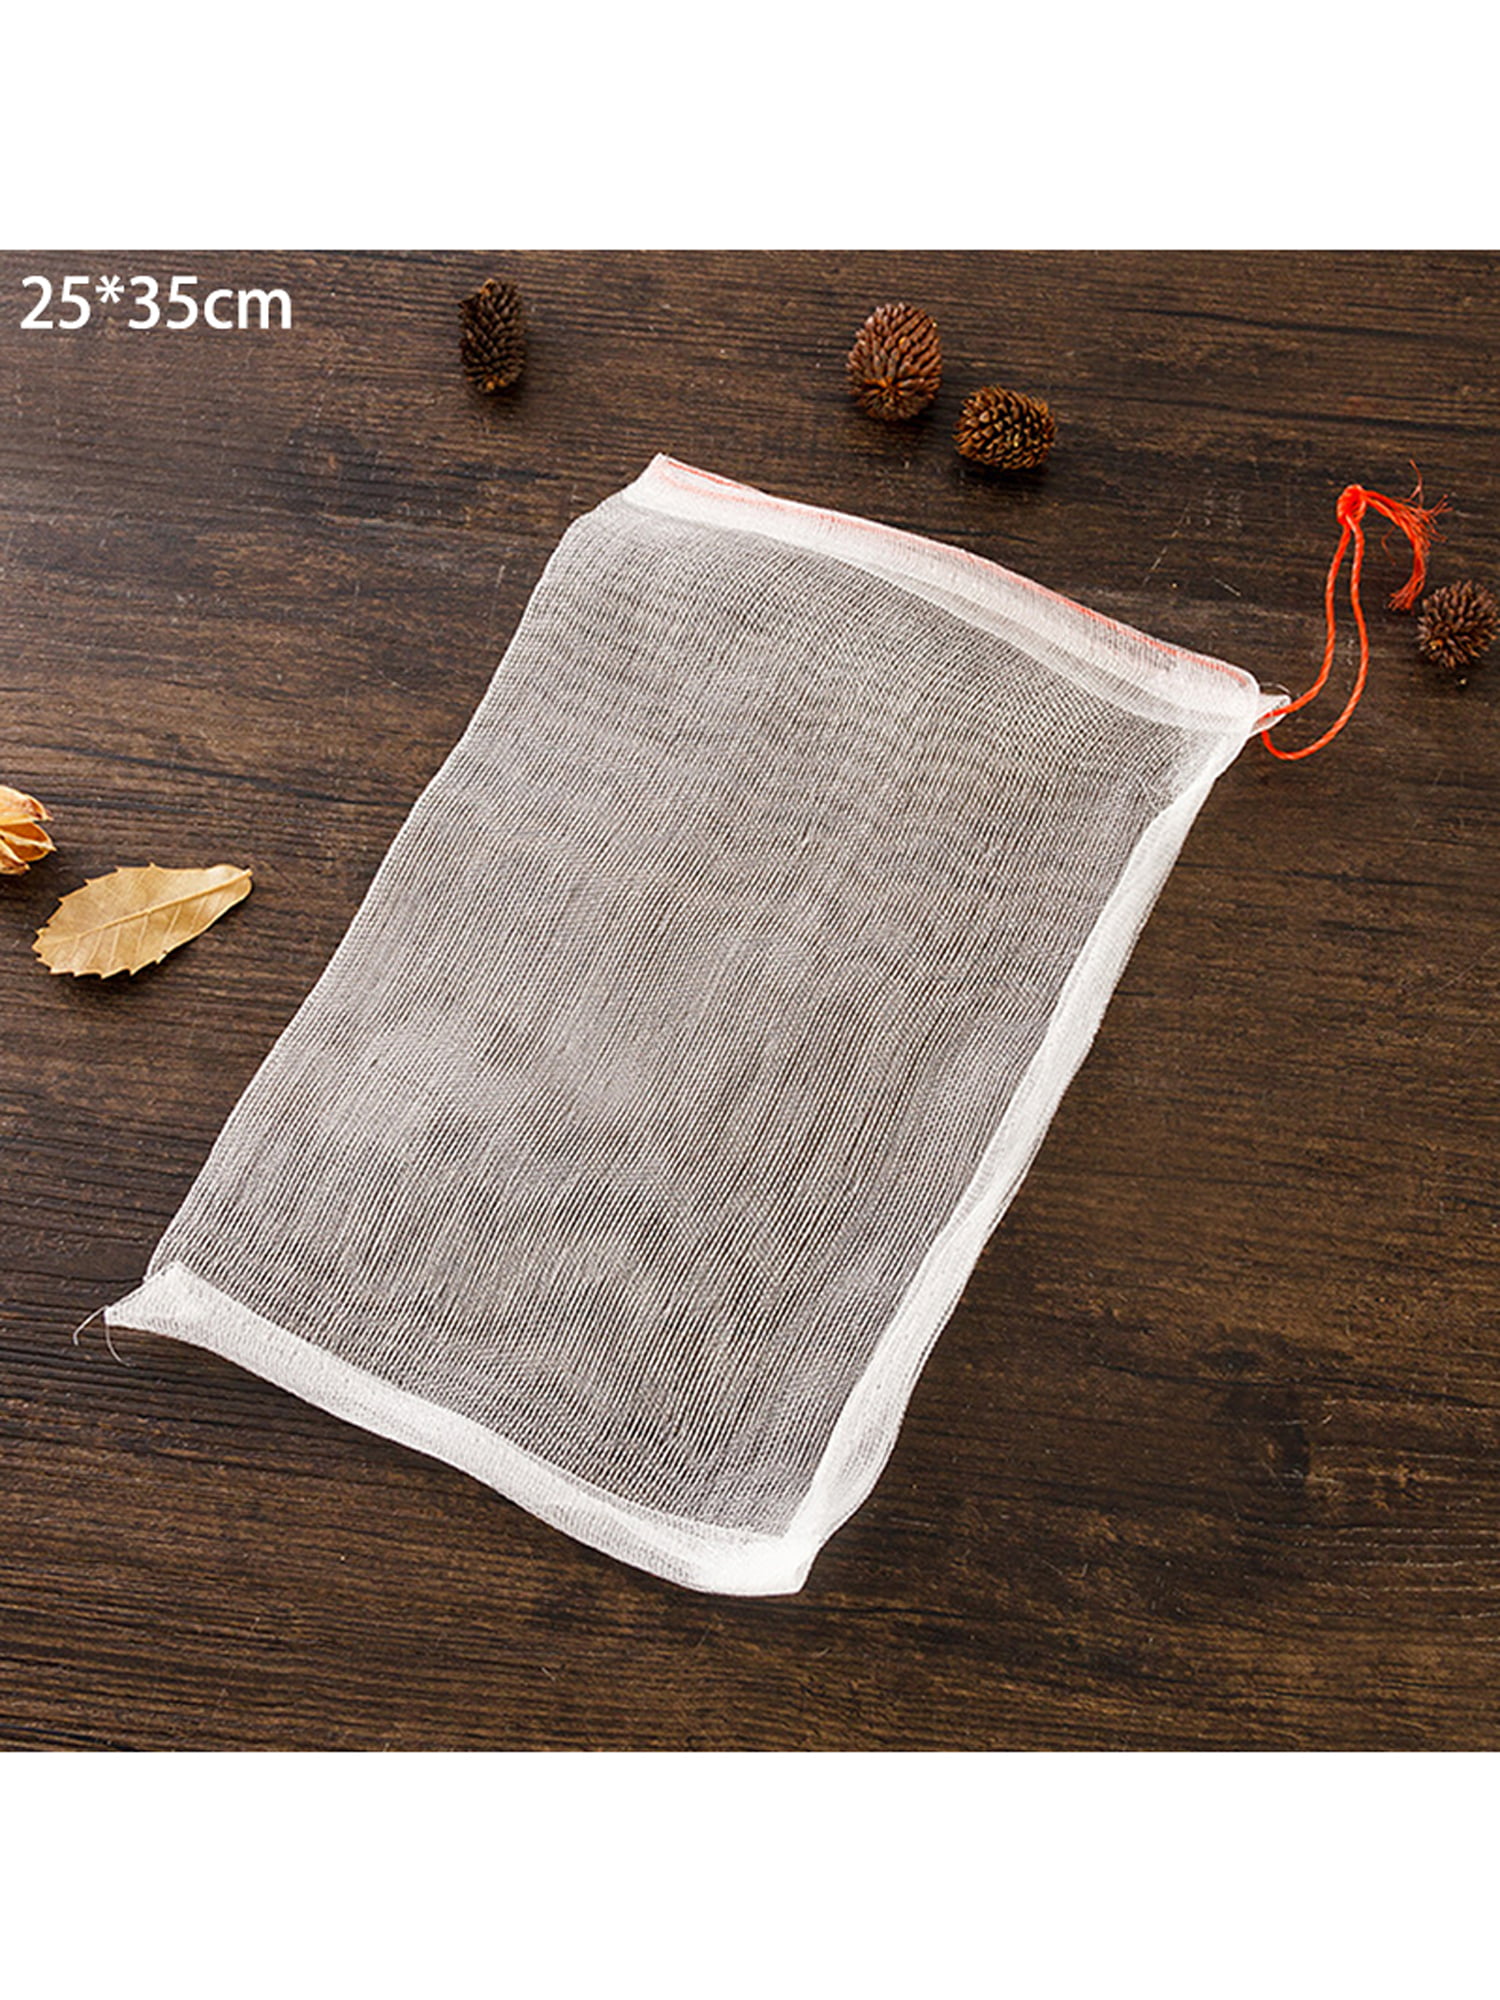 Details about   100Pcs Grape Protection Bag Anti Bird Moisture Insect Net Bags Vegetable Protect 